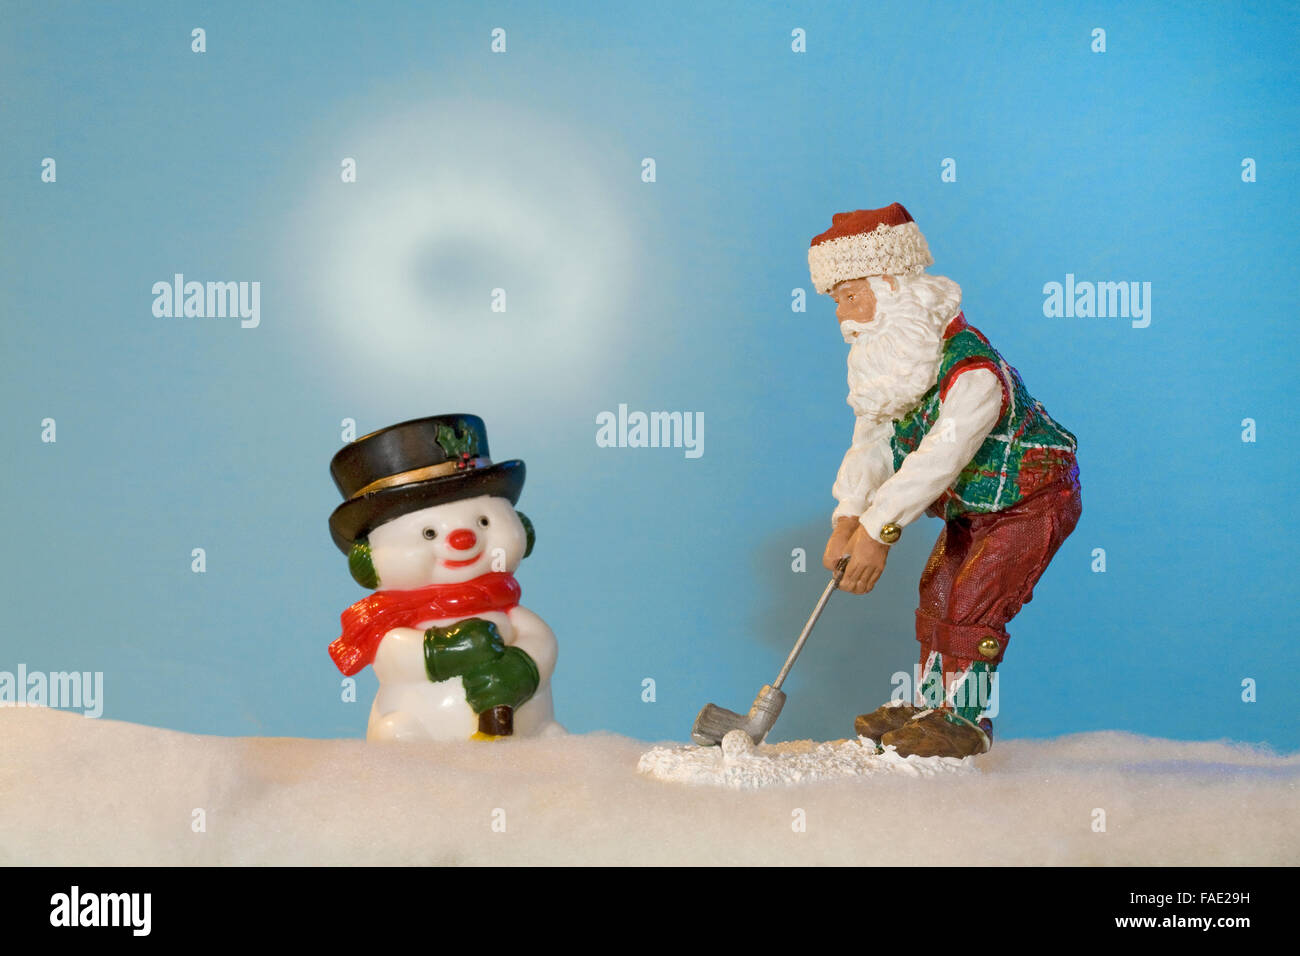 Santa Clause and his snowman friend play golf in a snowfield at the North Pole, just before Christmas. Stock Photo